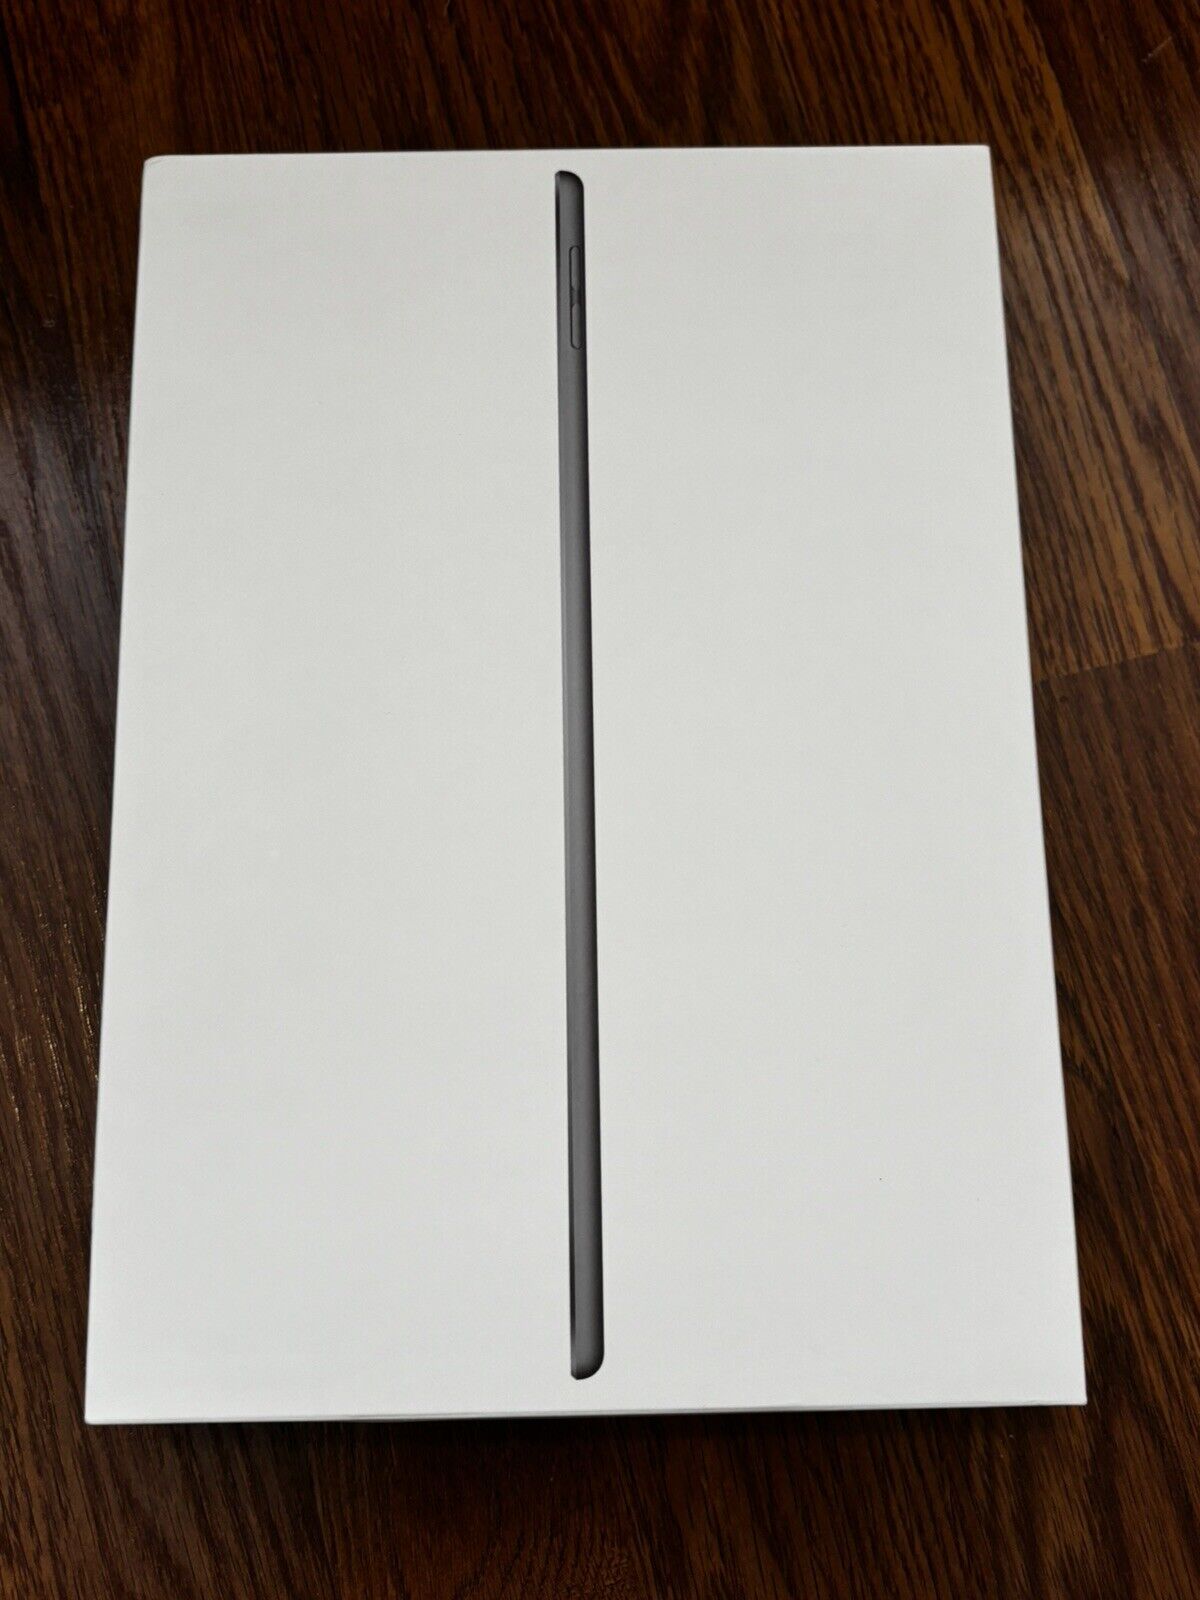 Apple iPad Air 64GB Tablet EMPTY BOX Only Space Gray Model #A2153 WiFi+Cellular